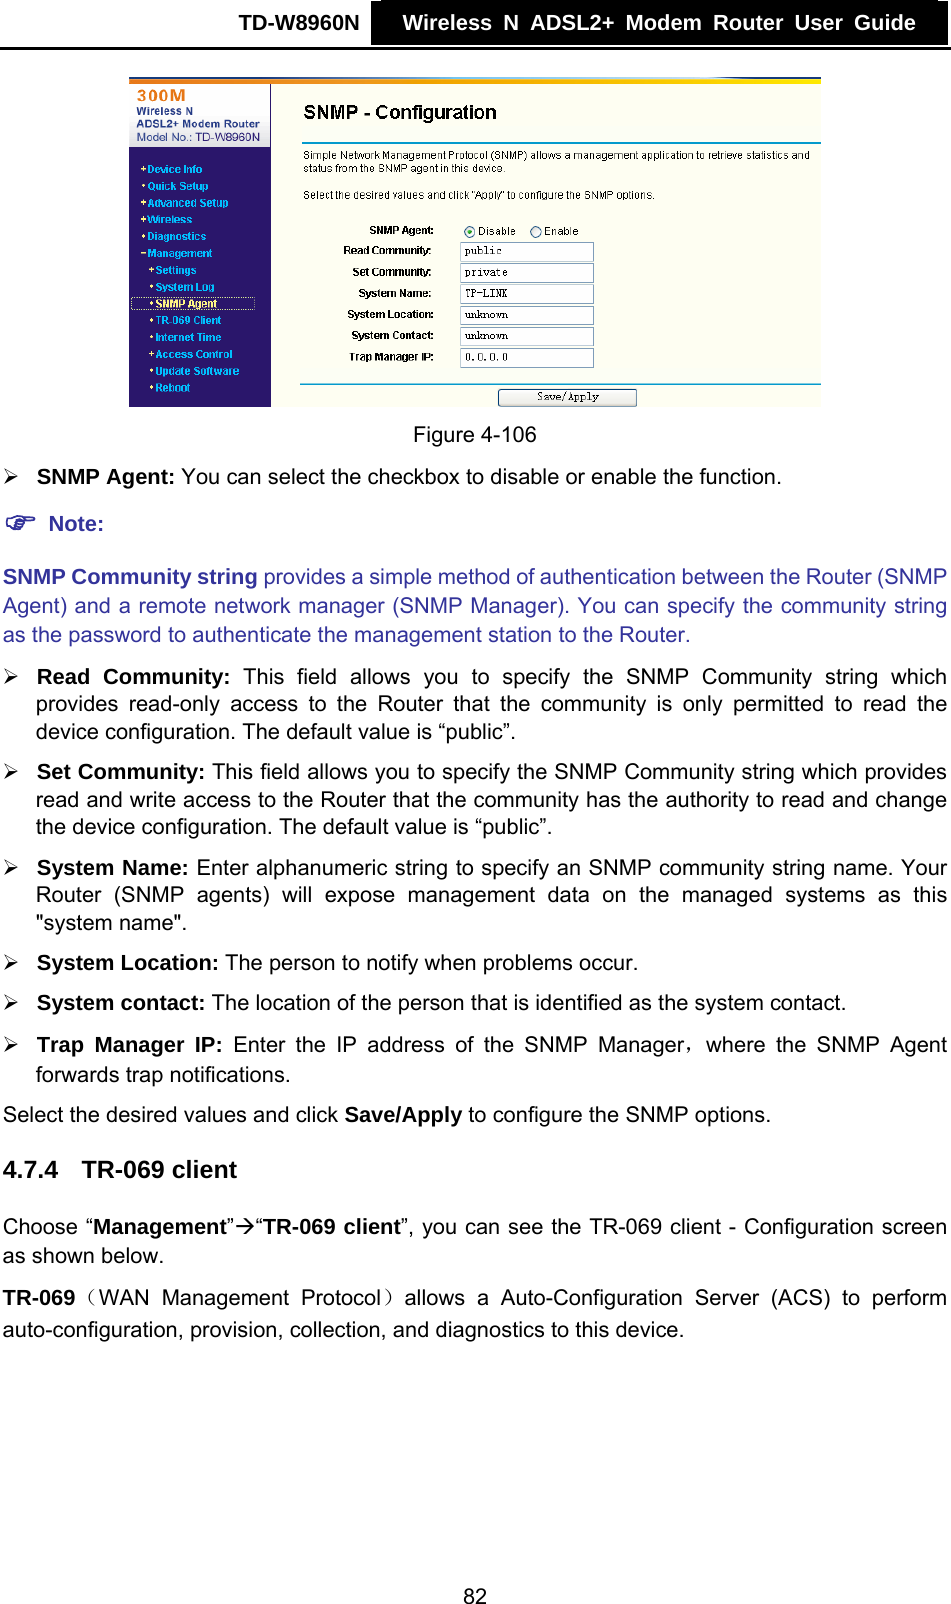 TD-W8960N    Wireless N ADSL2+ Modem Router User Guide     Figure 4-106 ¾ SNMP Agent: You can select the checkbox to disable or enable the function. ) Note: SNMP Community string provides a simple method of authentication between the Router (SNMP Agent) and a remote network manager (SNMP Manager). You can specify the community string as the password to authenticate the management station to the Router. ¾ Read Community: This field allows you to specify the SNMP Community string which provides read-only access to the Router that the community is only permitted to read the device configuration. The default value is “public”. ¾ Set Community: This field allows you to specify the SNMP Community string which provides read and write access to the Router that the community has the authority to read and change the device configuration. The default value is “public”. ¾ System Name: Enter alphanumeric string to specify an SNMP community string name. Your Router (SNMP agents) will expose management data on the managed systems as this &quot;system name&quot;. ¾ System Location: The person to notify when problems occur. ¾ System contact: The location of the person that is identified as the system contact. ¾ Trap Manager IP: Enter the IP address of the SNMP Manager，where the SNMP Agent forwards trap notifications. Select the desired values and click Save/Apply to configure the SNMP options. 4.7.4  TR-069 client Choose “Management”Æ“TR-069 client”, you can see the TR-069 client - Configuration screen as shown below. TR-069（WAN Management Protocol）allows a Auto-Configuration Server (ACS) to perform auto-configuration, provision, collection, and diagnostics to this device. 82 